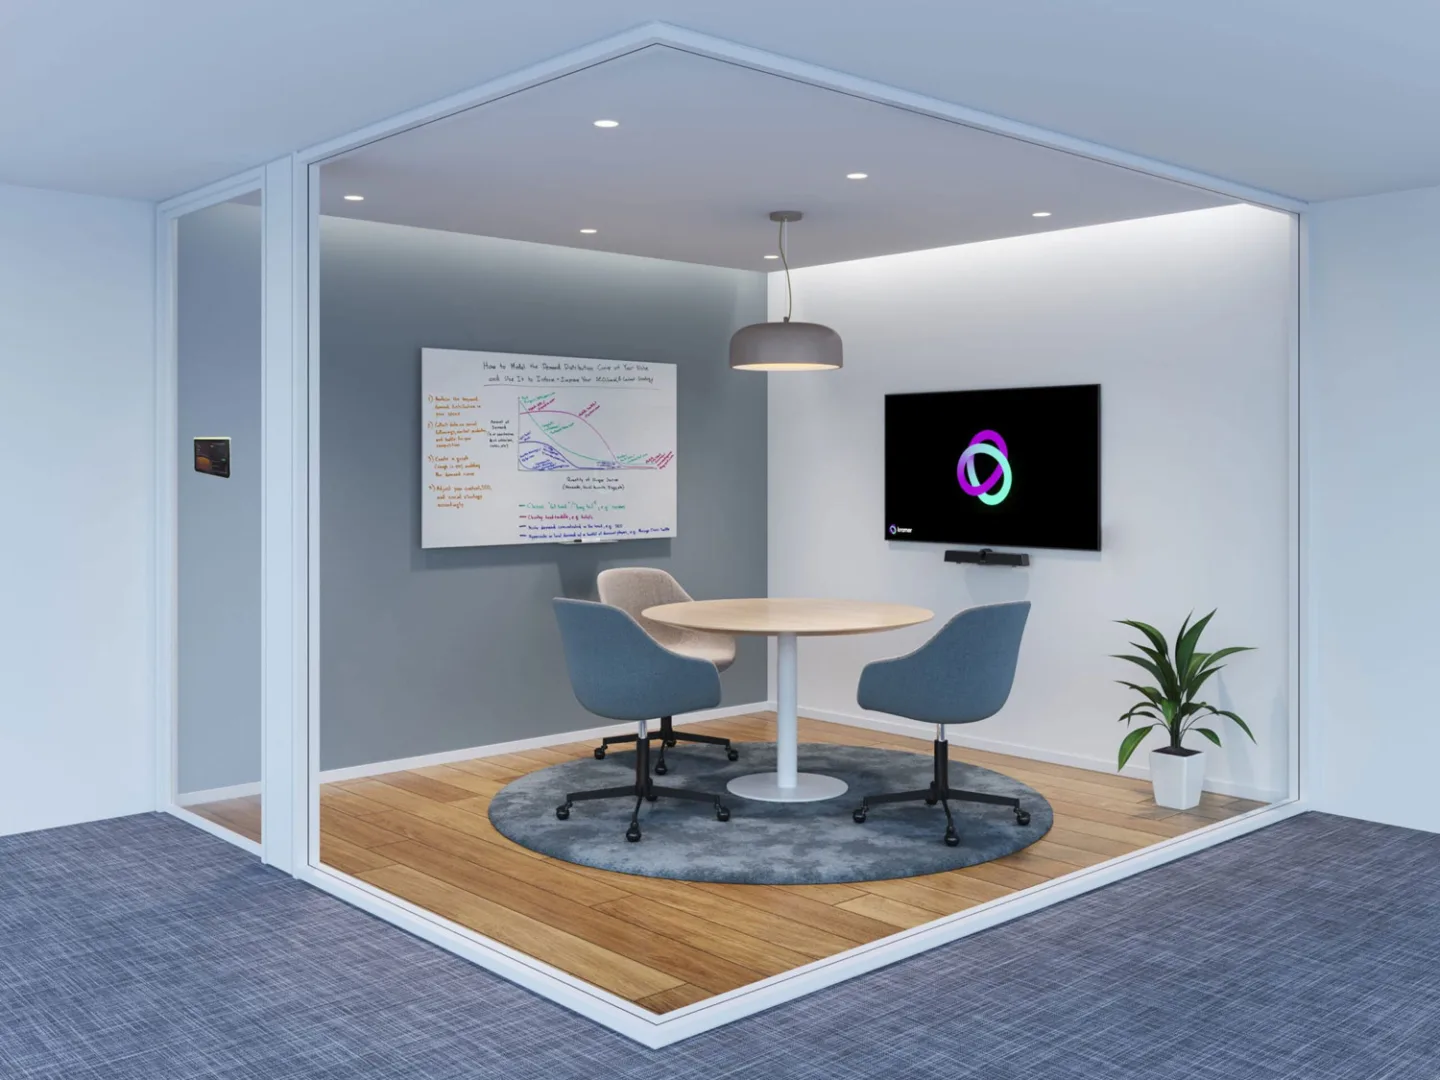 A huddle room, with MTR solutions for Huddle Rooms 